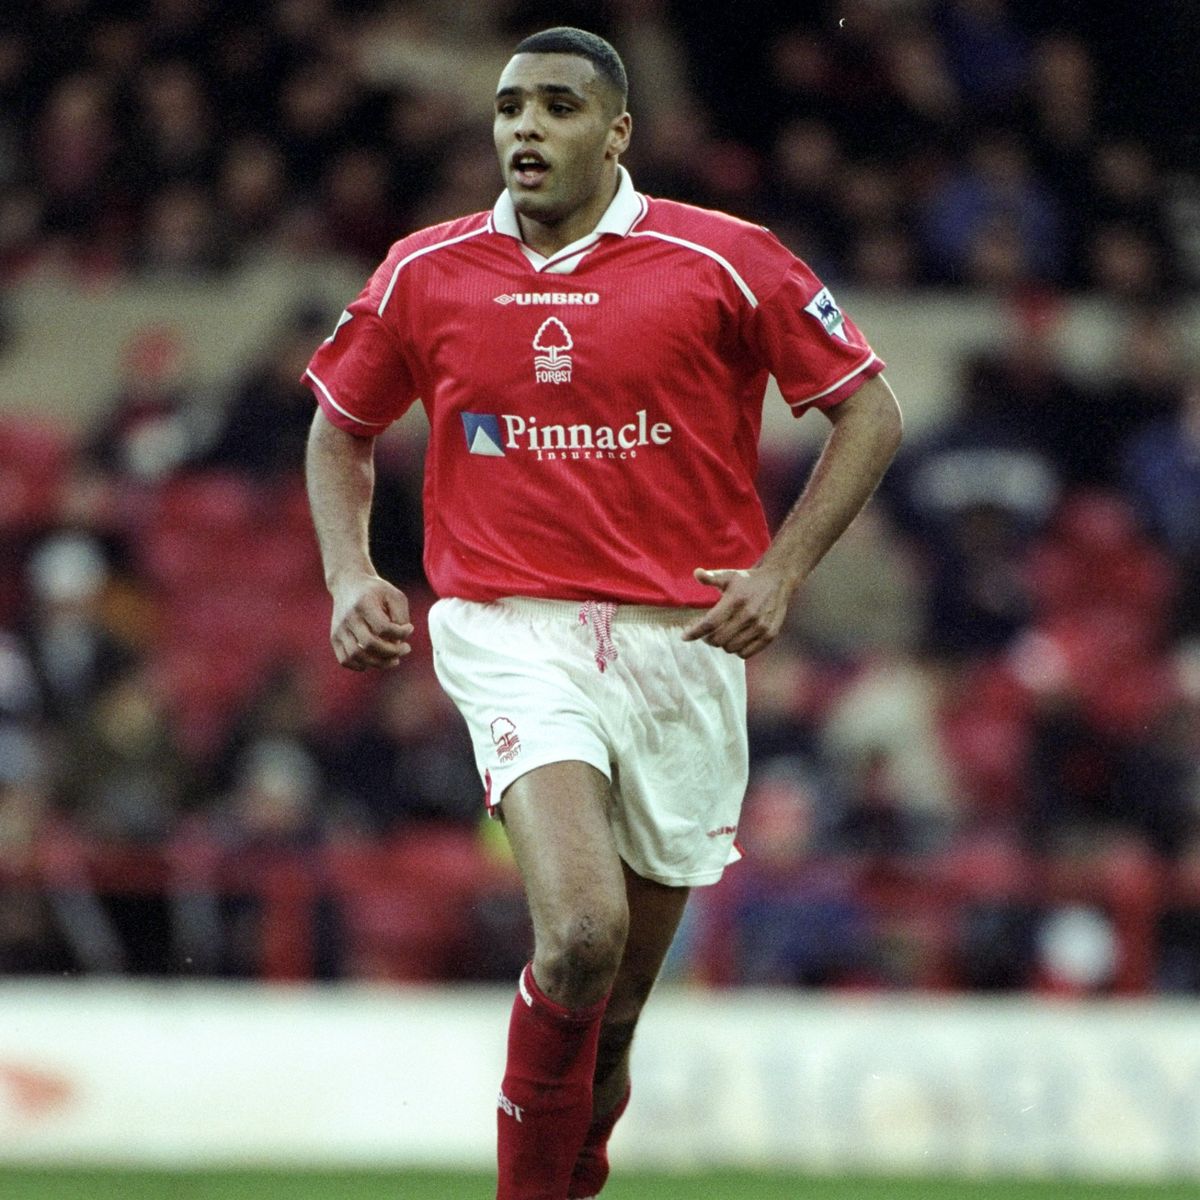 RT @ForestTill1Die: 23 years ago today, Pierre Van Hooijdonk left #NFFC

What's your lasting memory of him? https://t.co/1P8hWmNilb